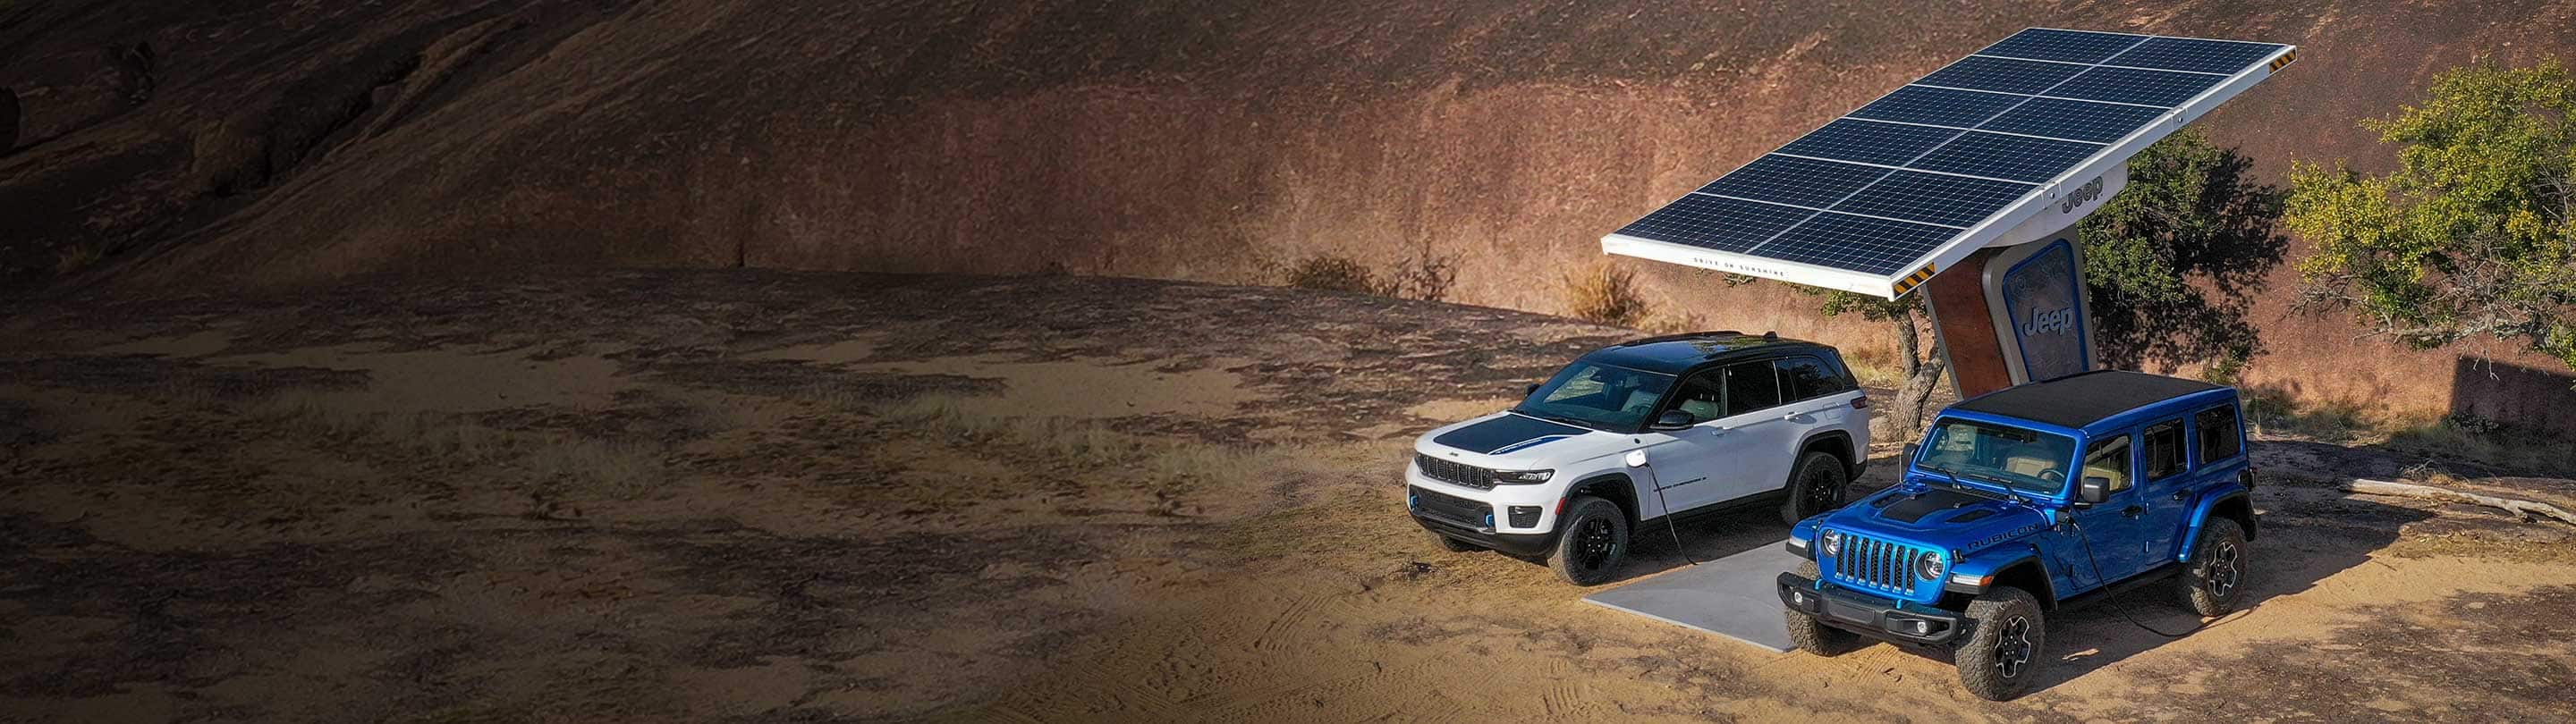 A 2023 Jeep Grand Cherokee Trailhawk 4xe and a 2023 Jeep Wrangler Rubicon 4xe being charged at a Jeep-branded solar-powered charging station located off-road, with a huge sand dune in the background.